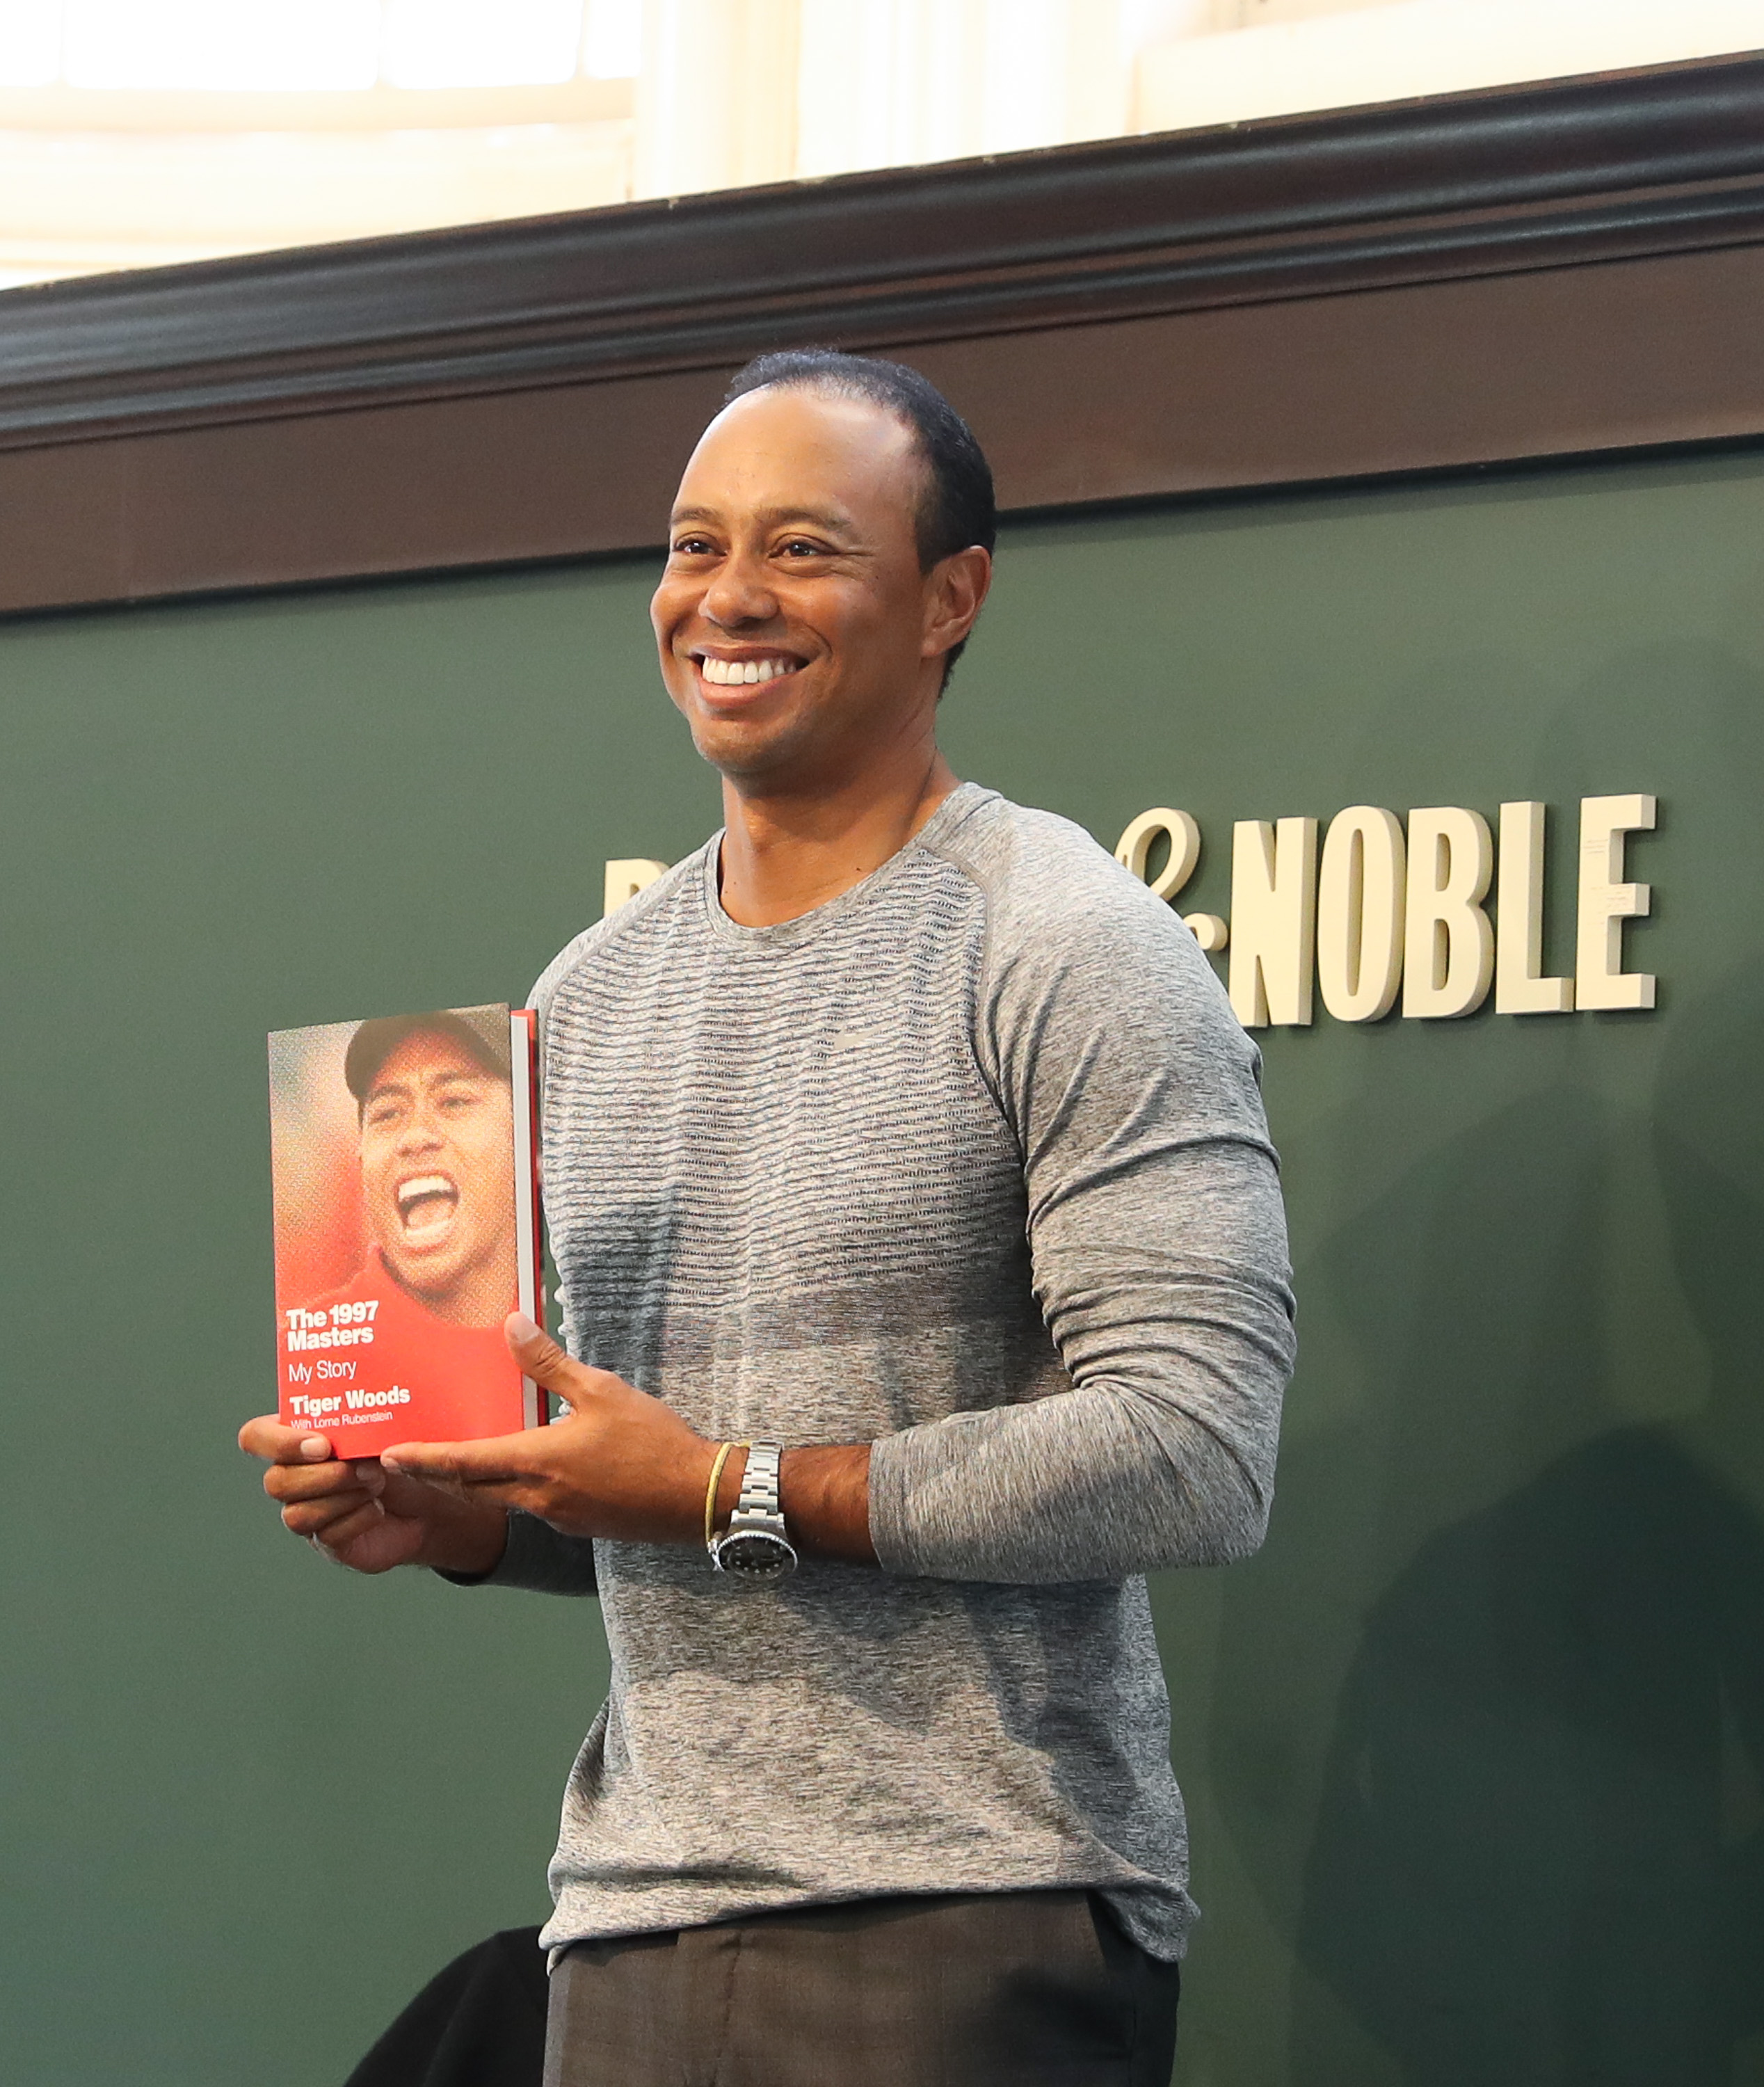 Tiger Woods Signs Copies Of His New Book 'The 1997 Masters: My Story'